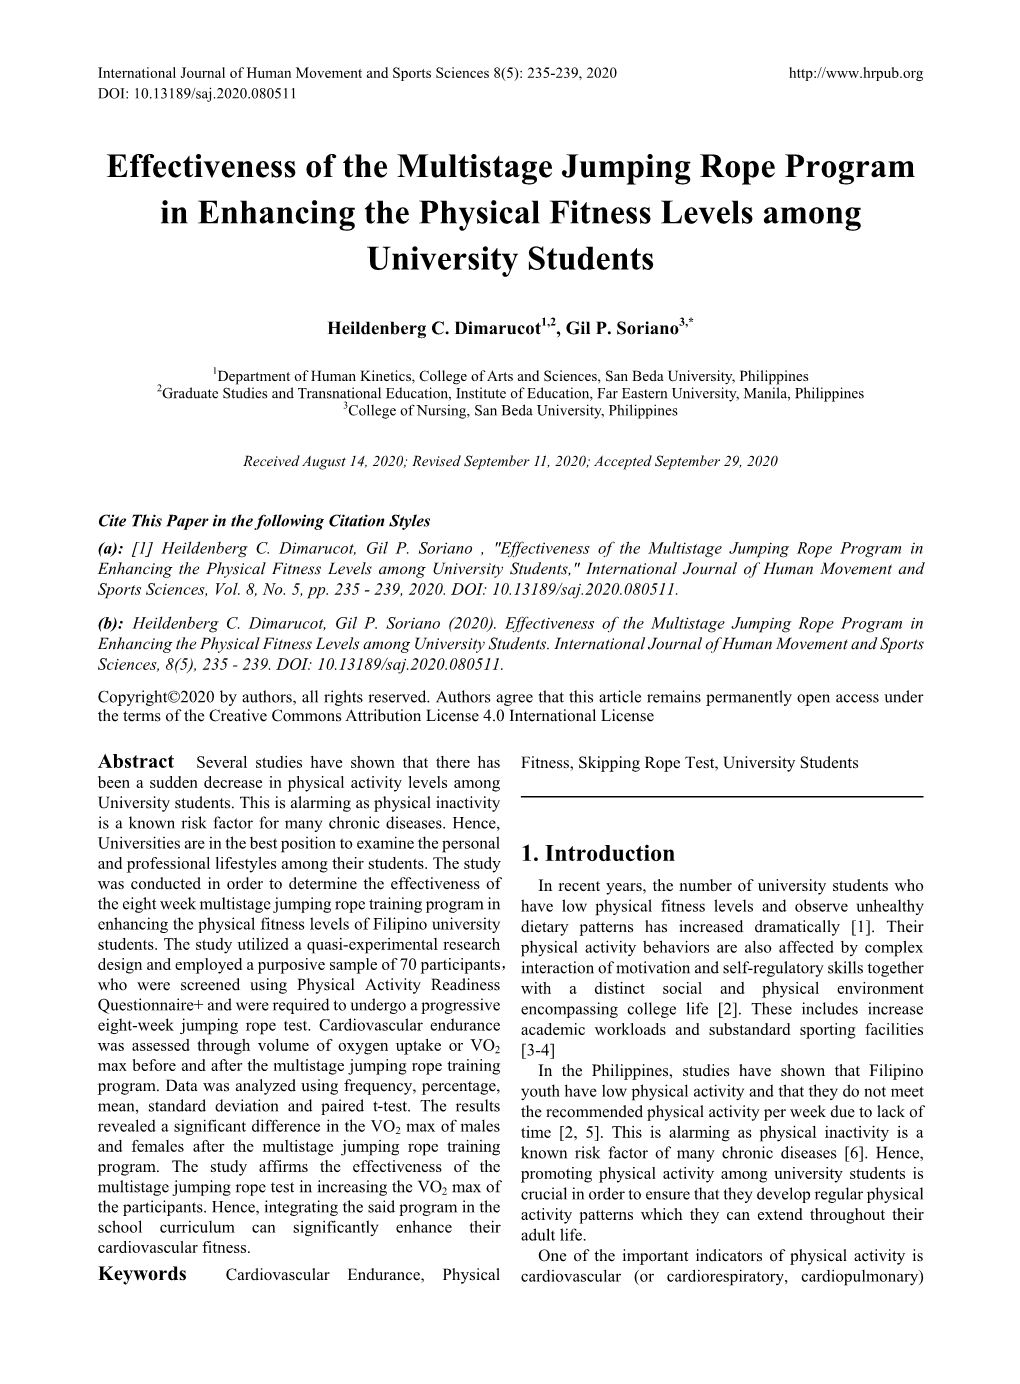 Effectiveness of the Multistage Jumping Rope Program in Enhancing the Physical Fitness Levels Among University Students